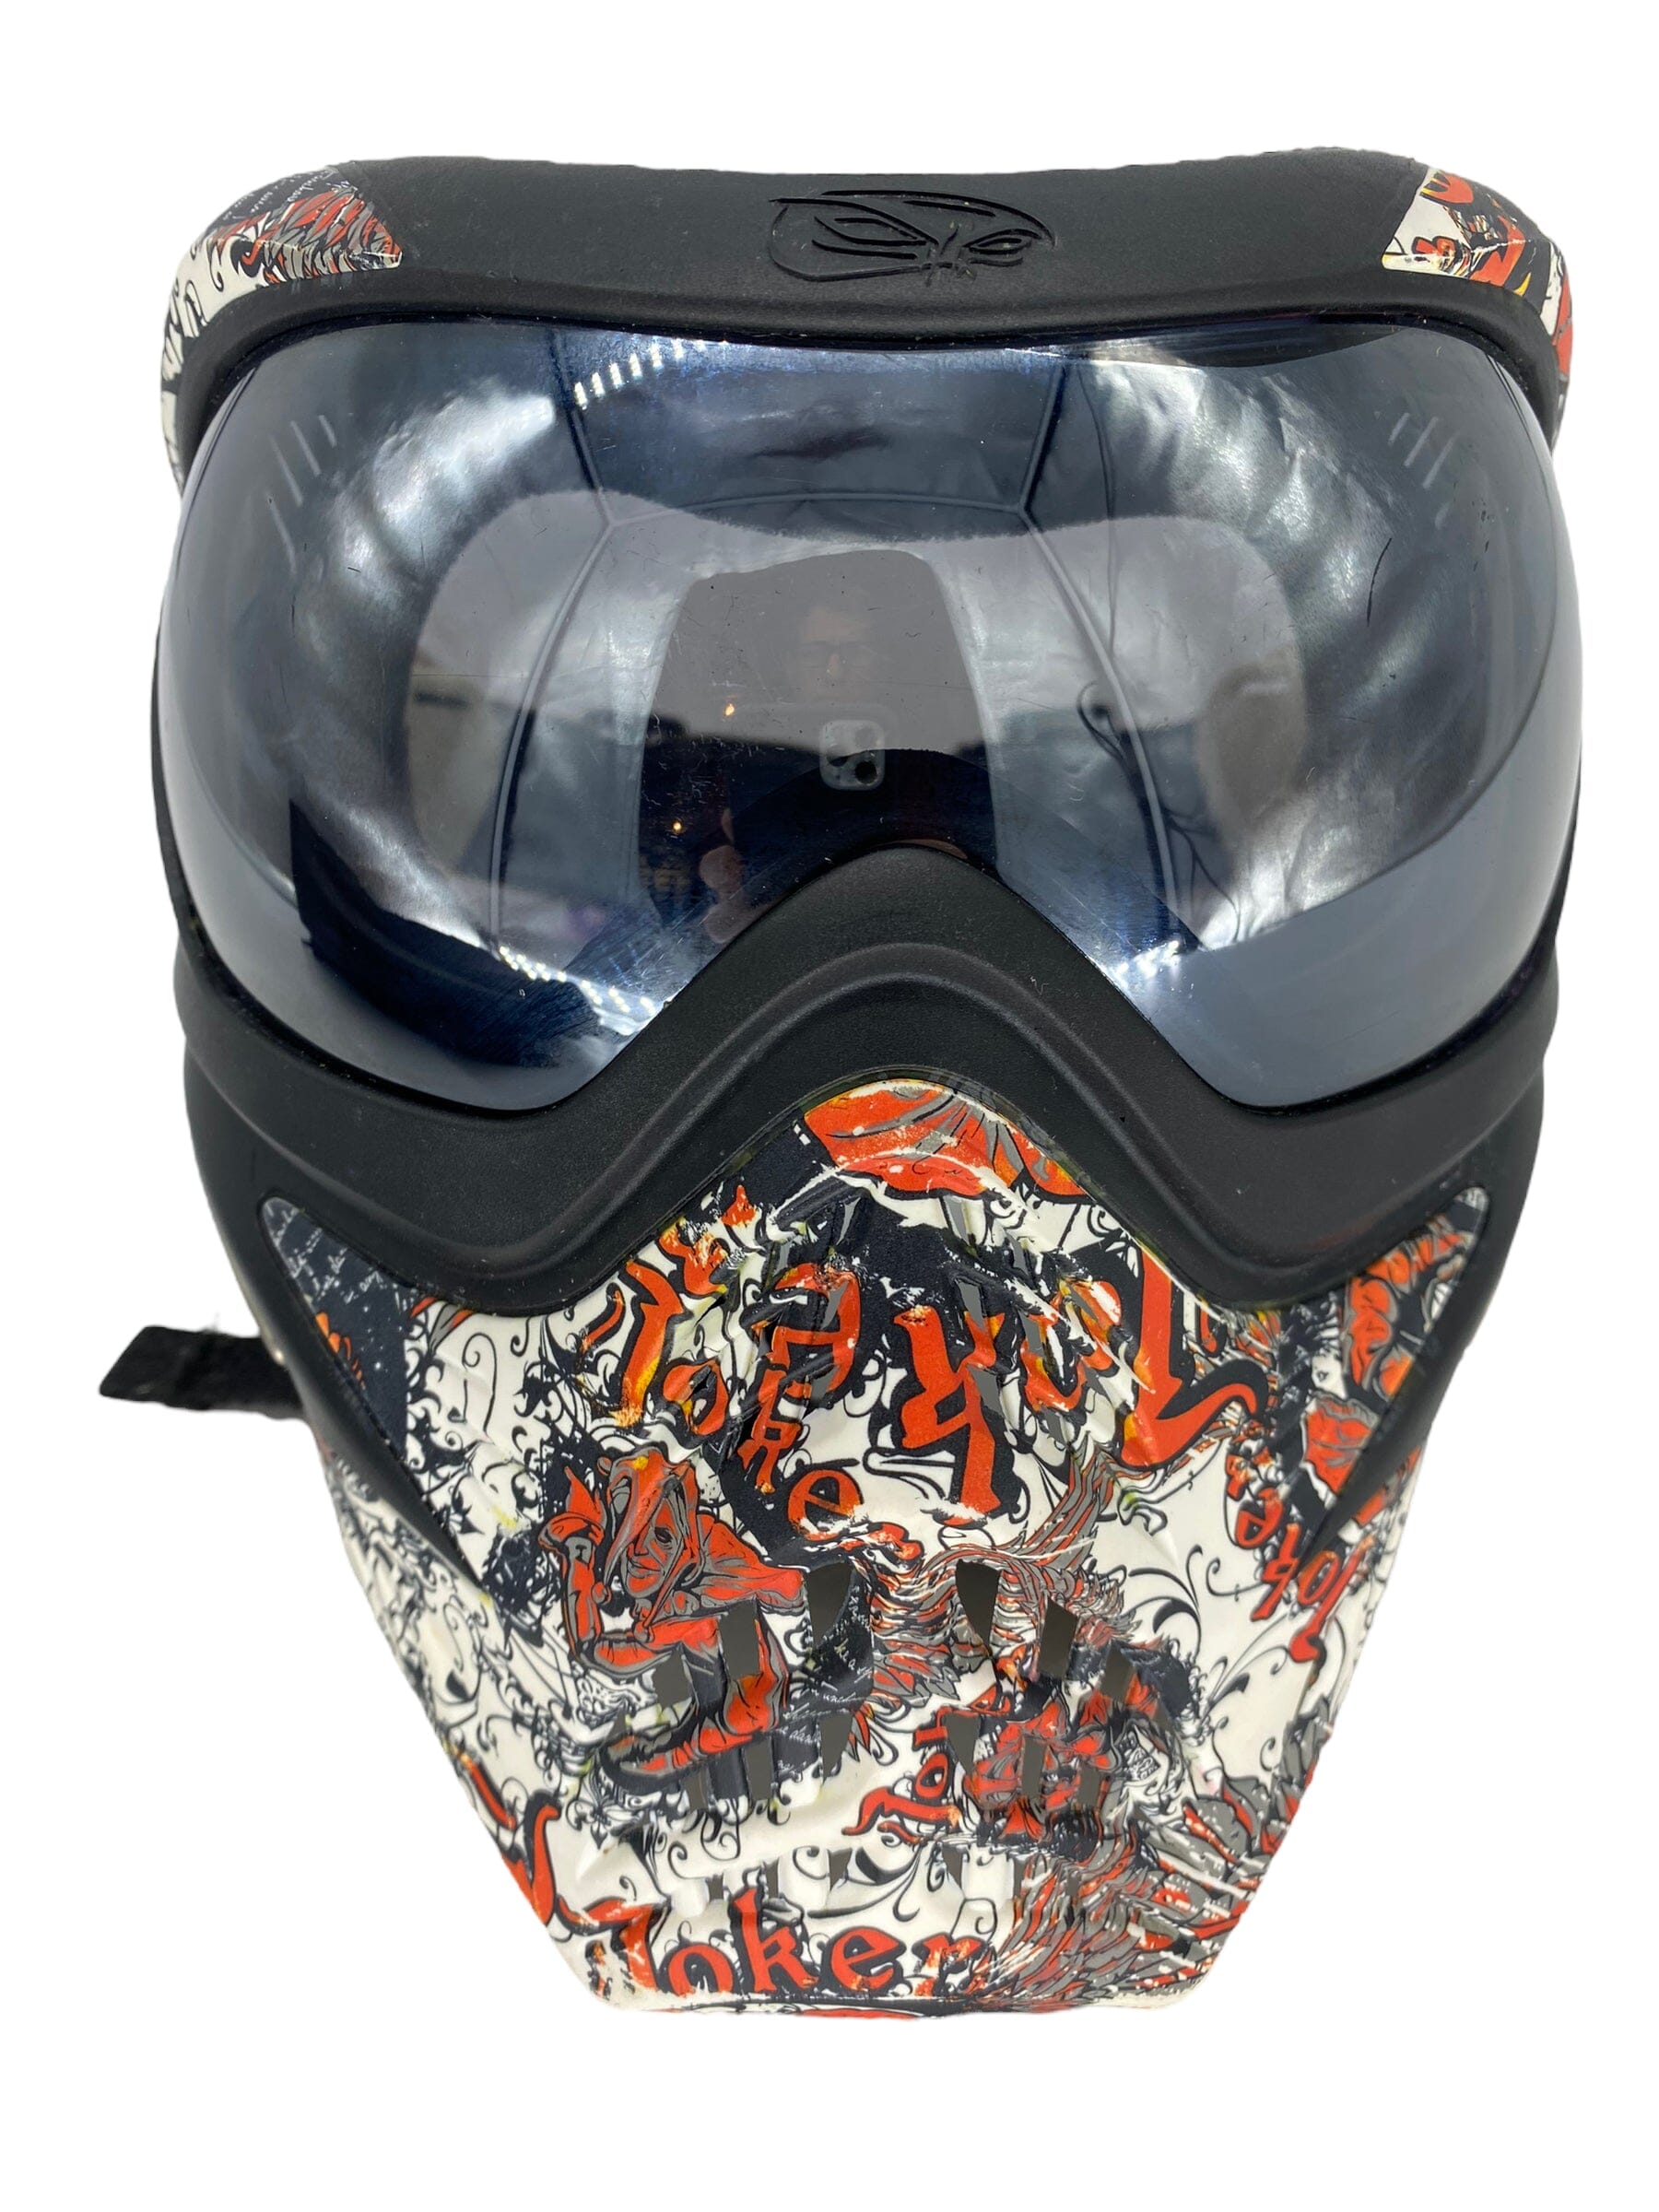 Used V-Force Paintball Goggle Mask Paintball Gun from CPXBrosPaintball Buy/Sell/Trade Paintball Markers, Paintball Hoppers, Paintball Masks, and Hormesis Headbands